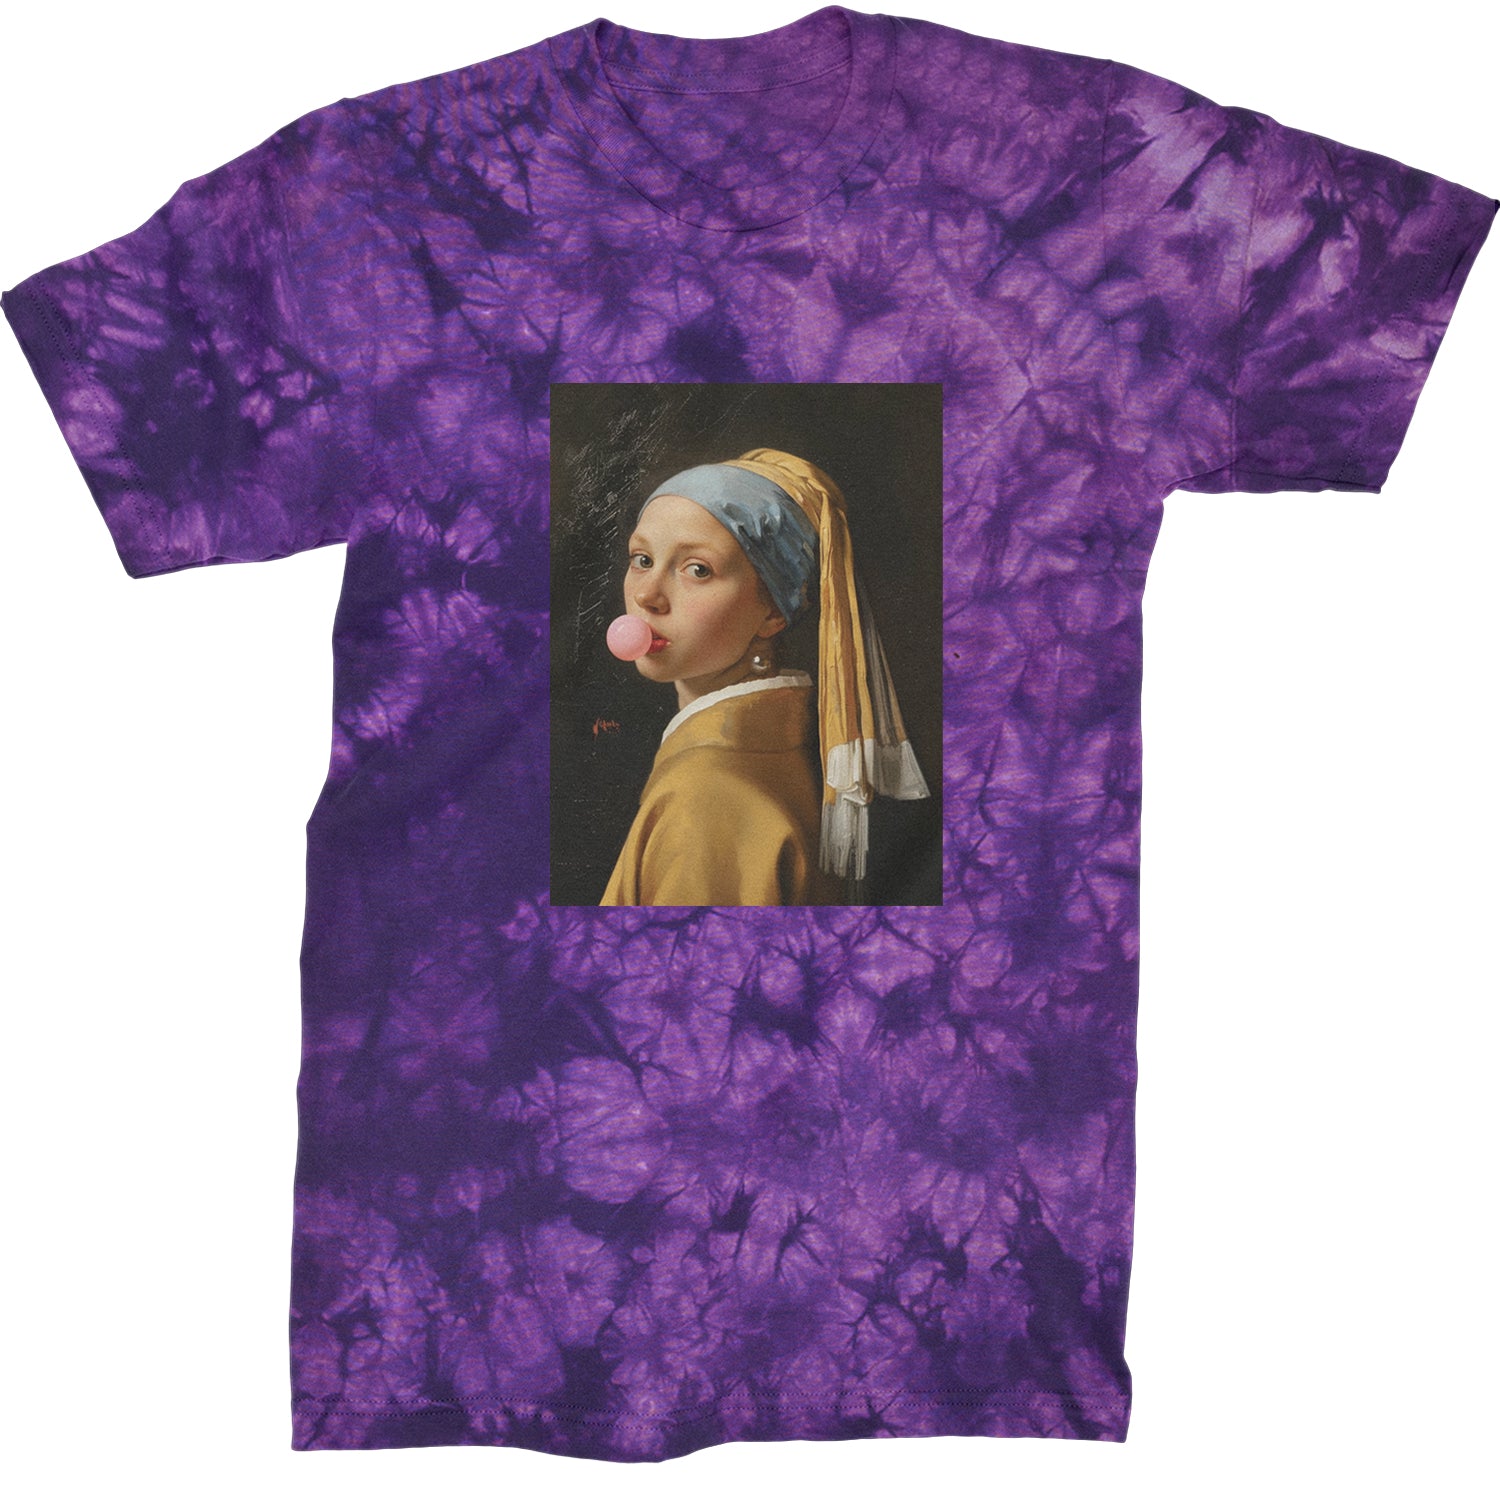 Girl with a Pearl Earring Bubble Gum Contemporary Art Mens T-shirt Tie-Dye Crystal Purple